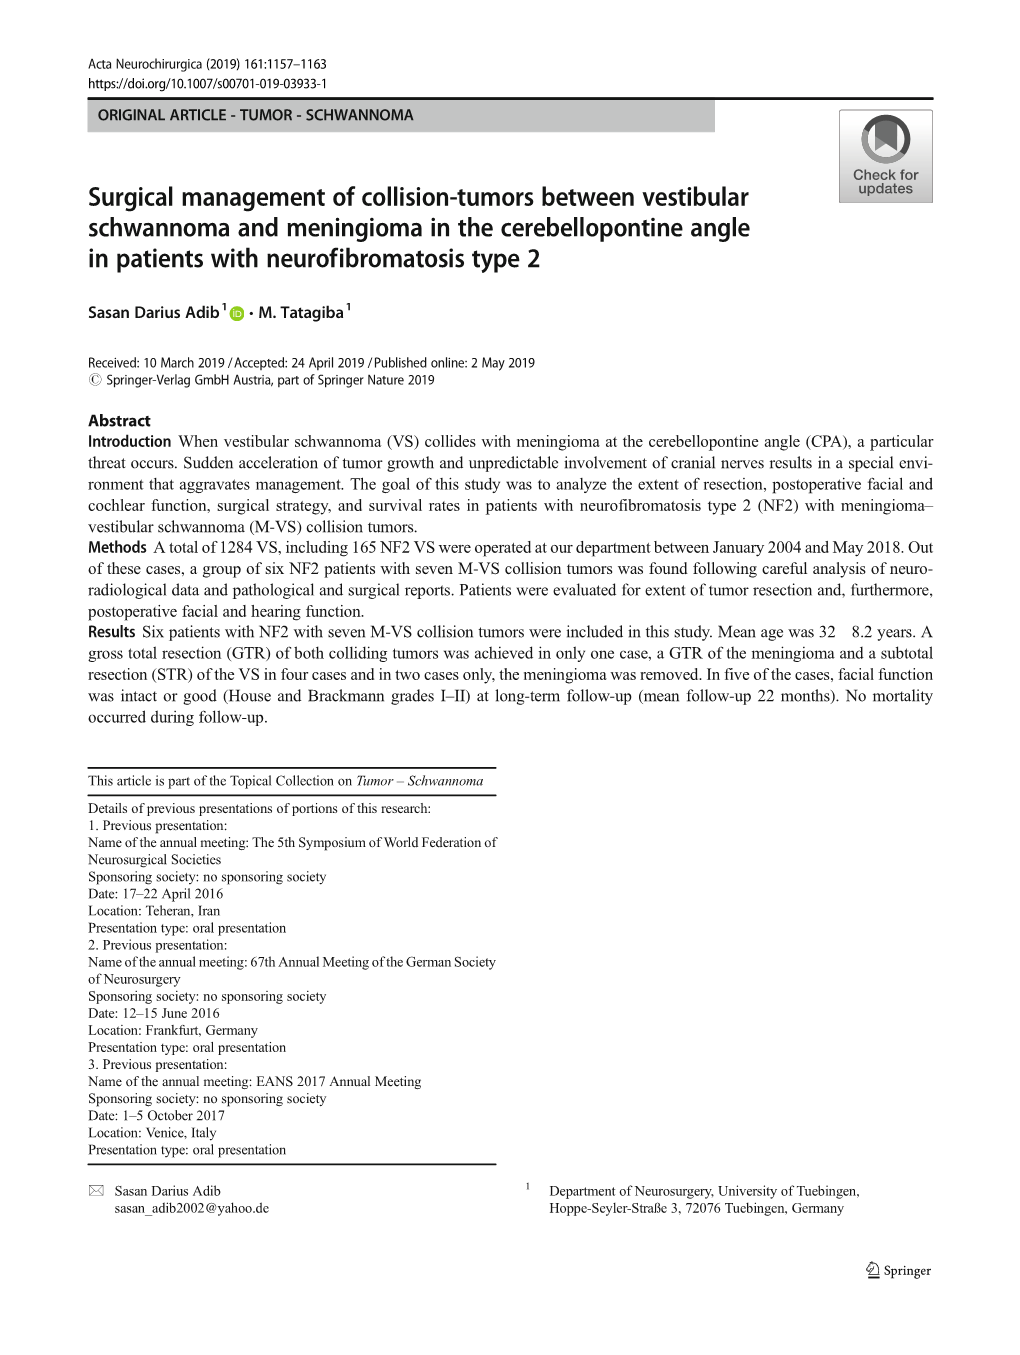 Surgical Management of Collision-Tumors Between Vestibular Schwannoma and Meningioma in the Cerebellopontine Angle in Patients with Neurofibromatosis Type 2